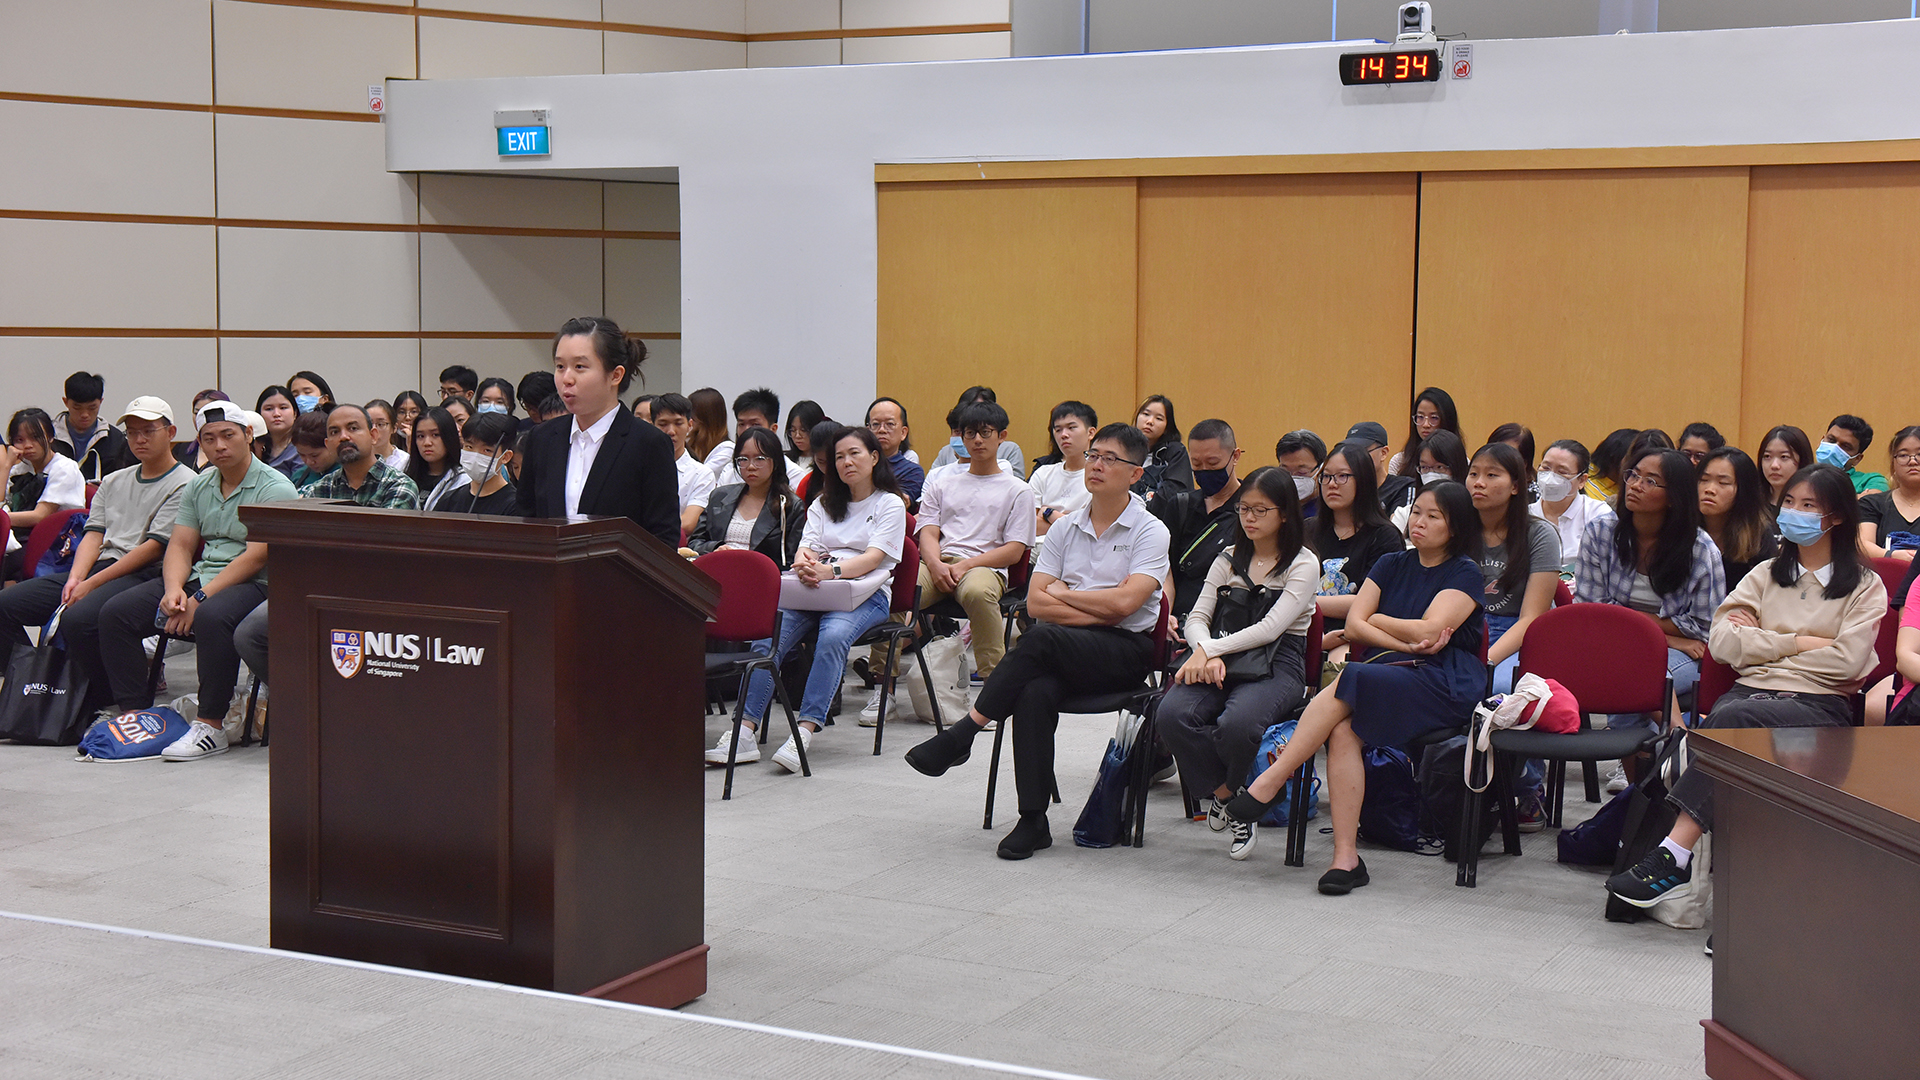 Prospective students got the opportunity to experience a courtroom setting at the moot court session at NUS Law.